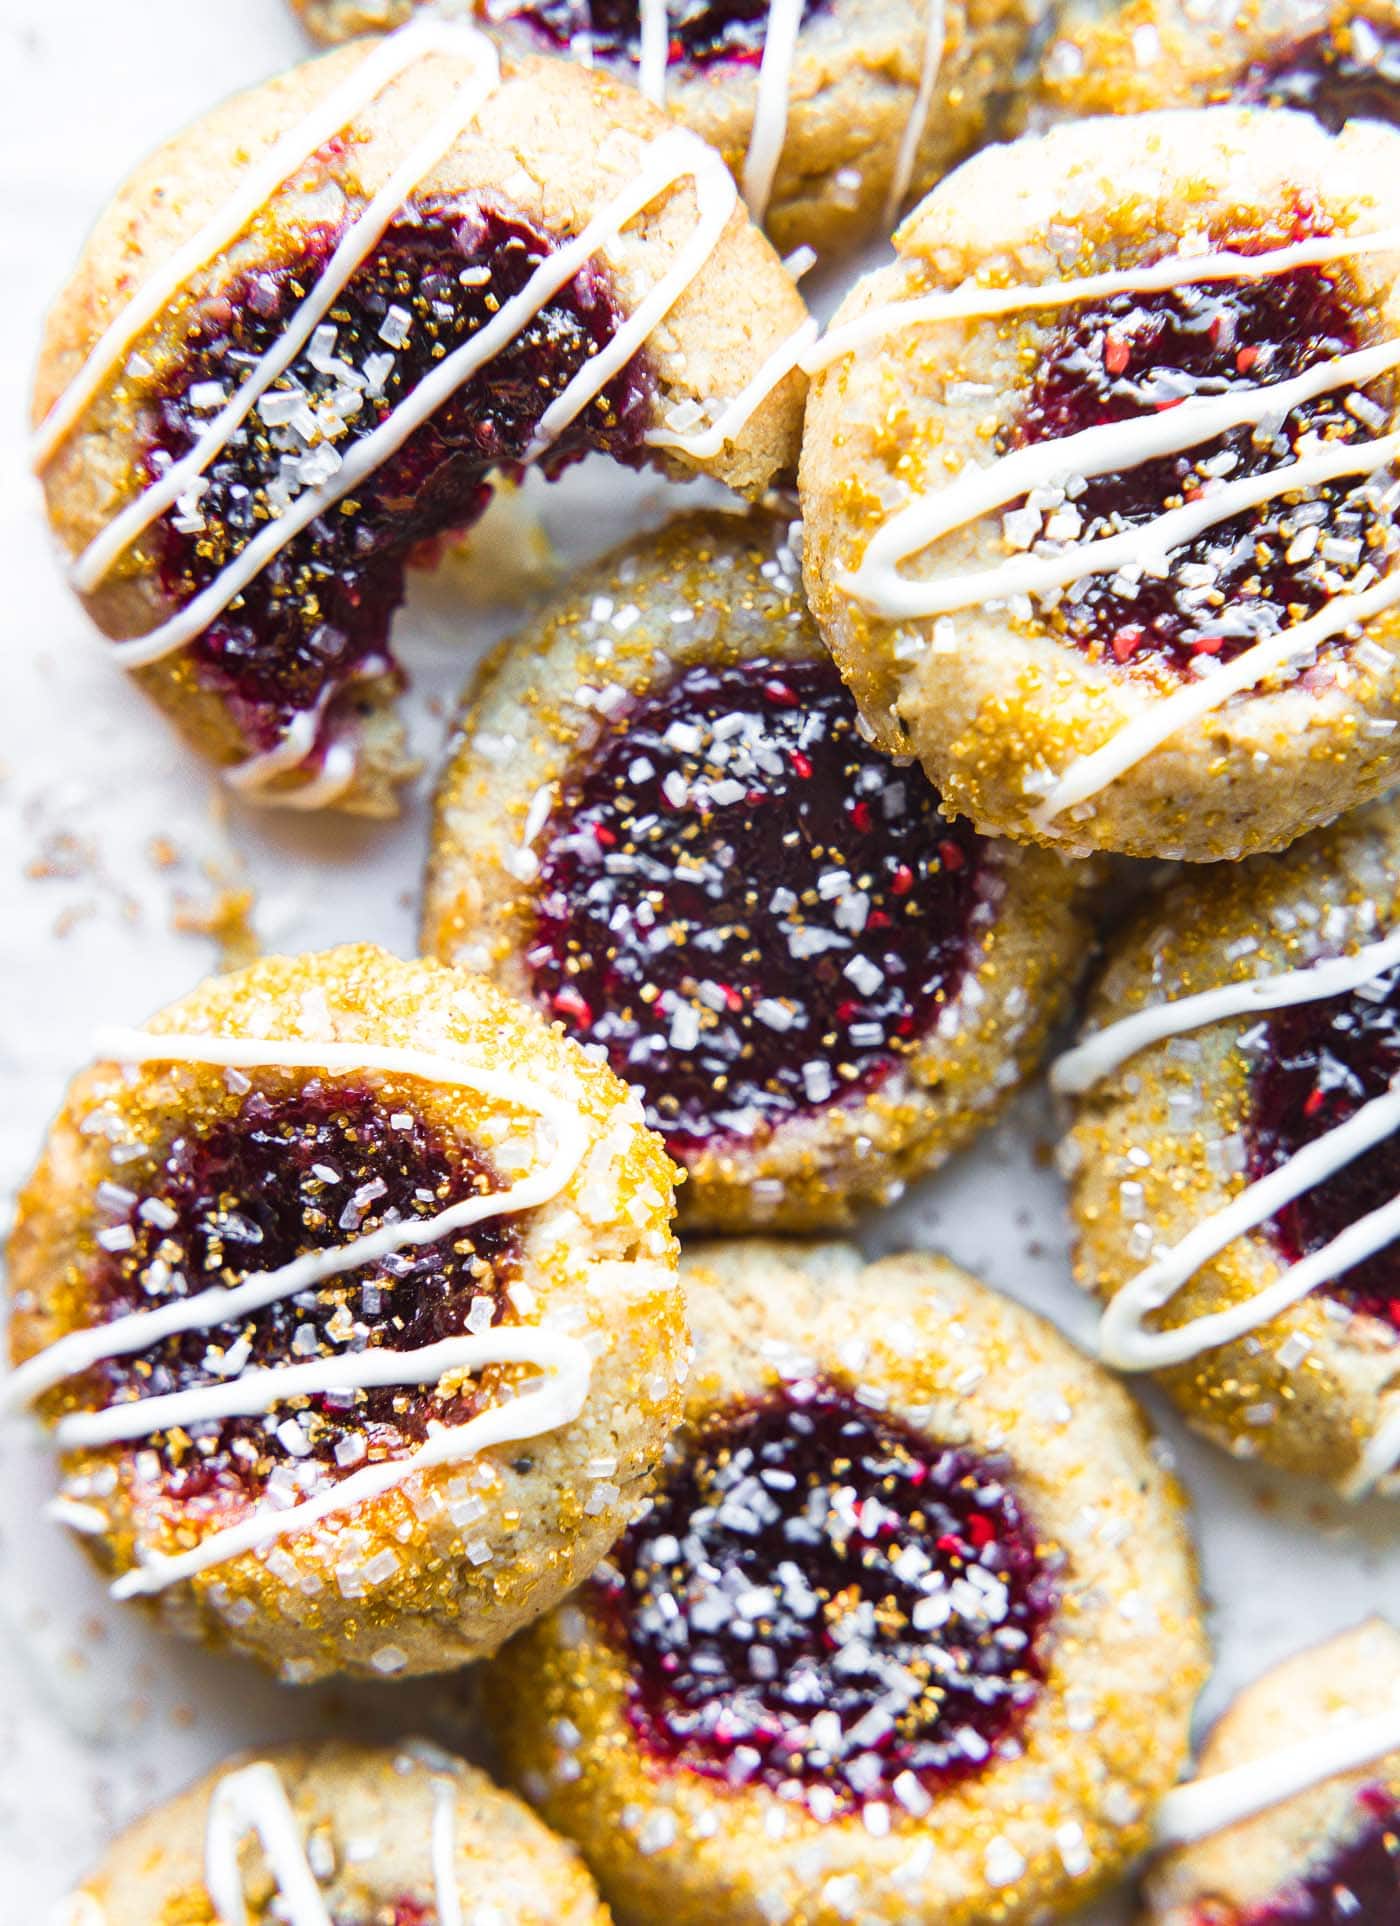 A pile of vegan raspberry thumbprint cookies with a white chocolate drizzle over top and gold sugar crystals sprinkled on top.